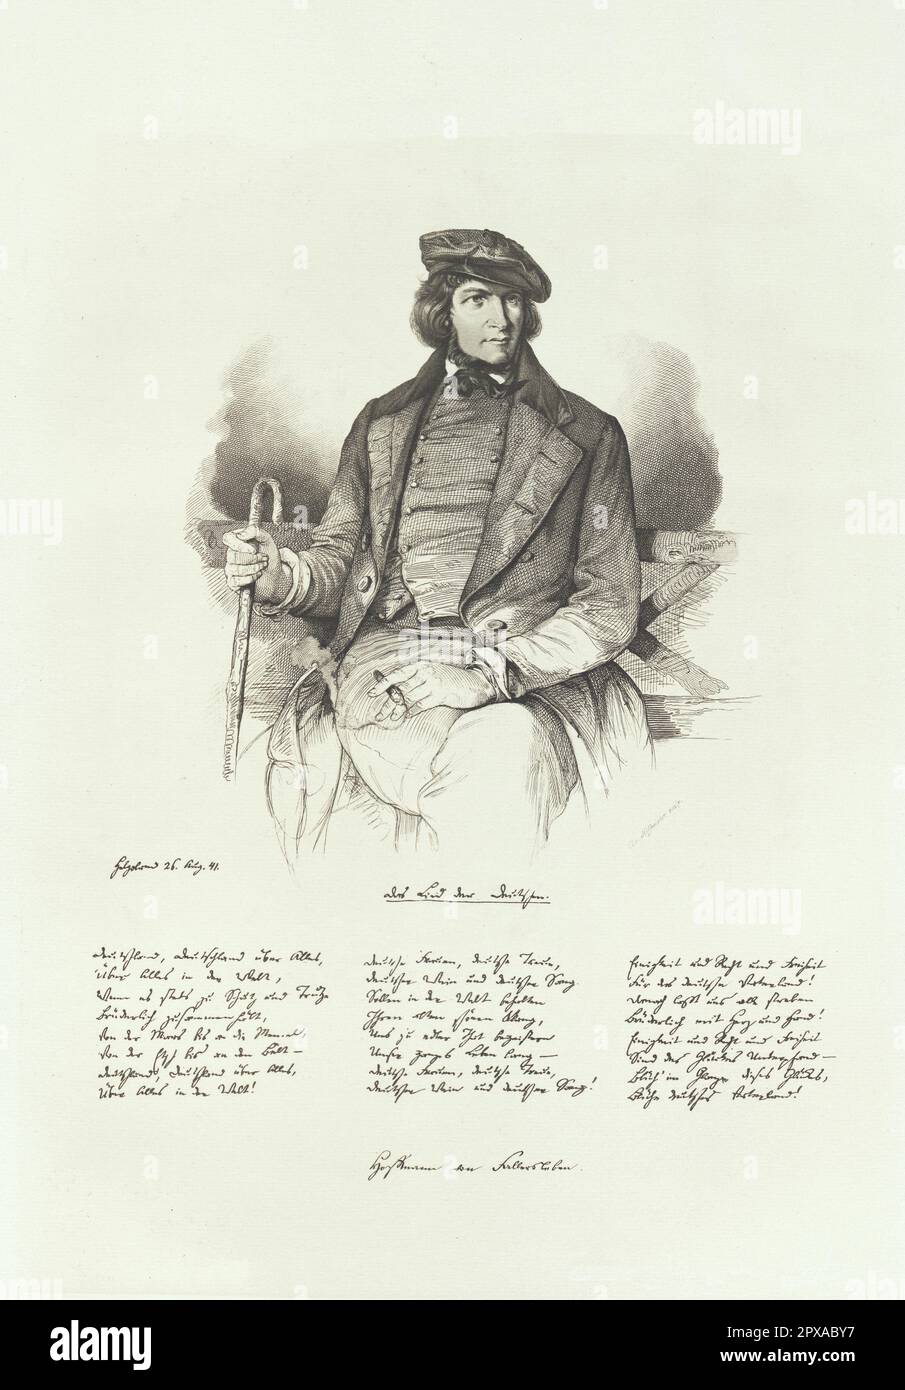 Portrait of August Heinrich Hoffmann von Fallersleben and facsimile of the Song of the Germans. 1914 August Heinrich Hoffmann calling himself von Fallersleben, after his hometown; (1798–1874) was a German poet. He is best known for writing 'Das Lied der Deutschen', whose third stanza is now the national anthem of Germany, and a number of popular children's songs, considered part of the Young Germany movement. Stock Photo